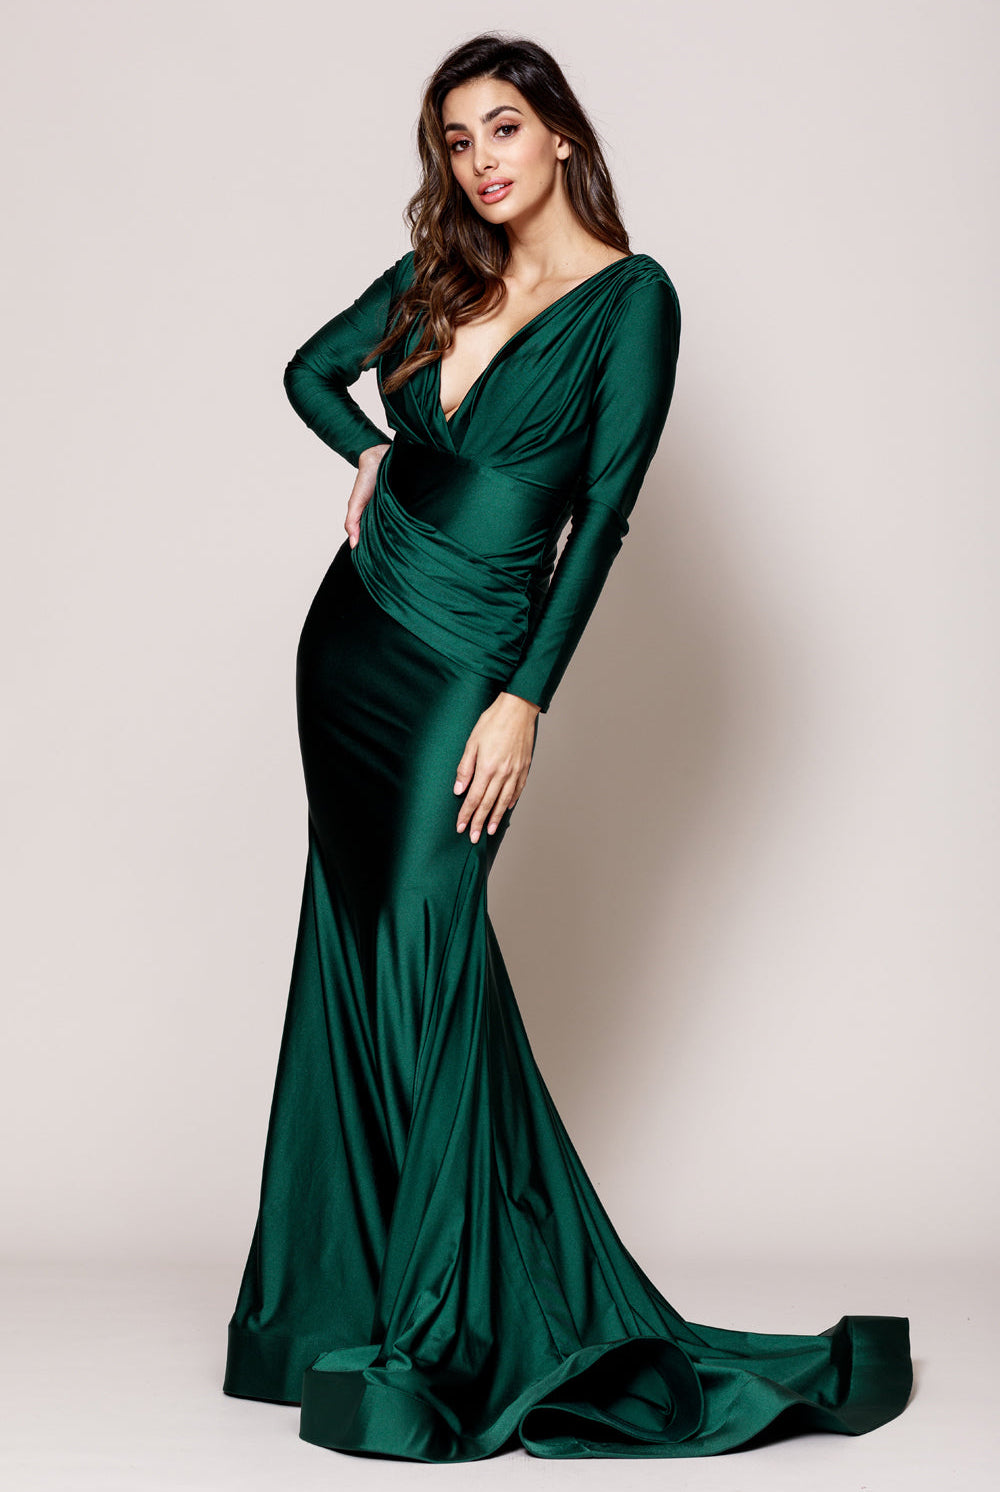 V-Neck Long Sleeves Mermaid Satin Long Evening & Mother Of The Bride Dress AC381-Mother of the Bride Dress-smcfashion.com